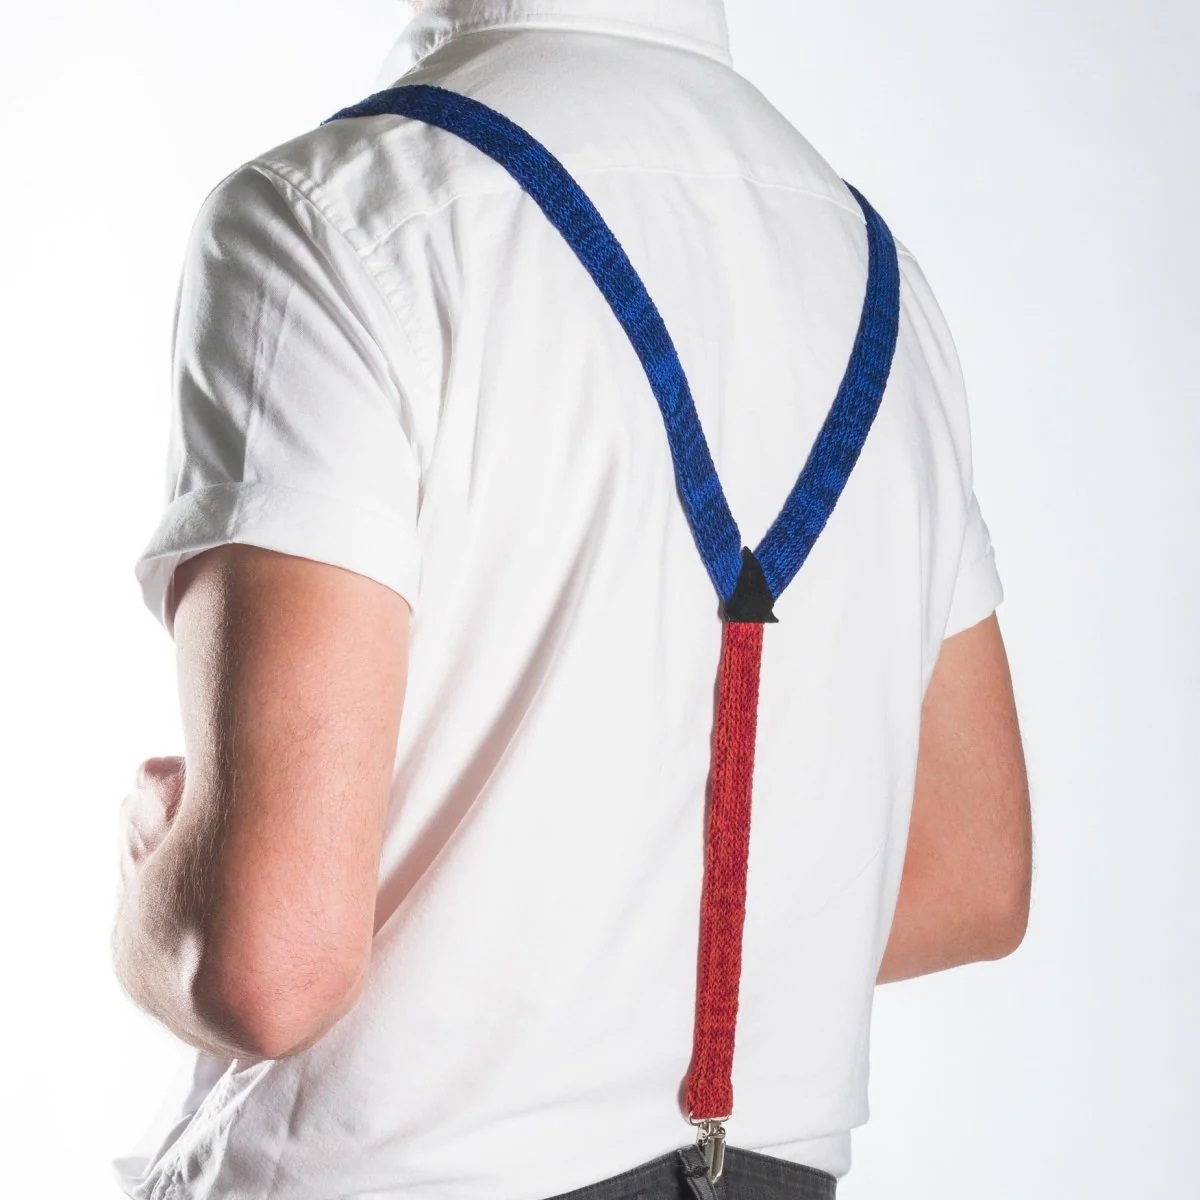 Where To Buy Colored Suspenders